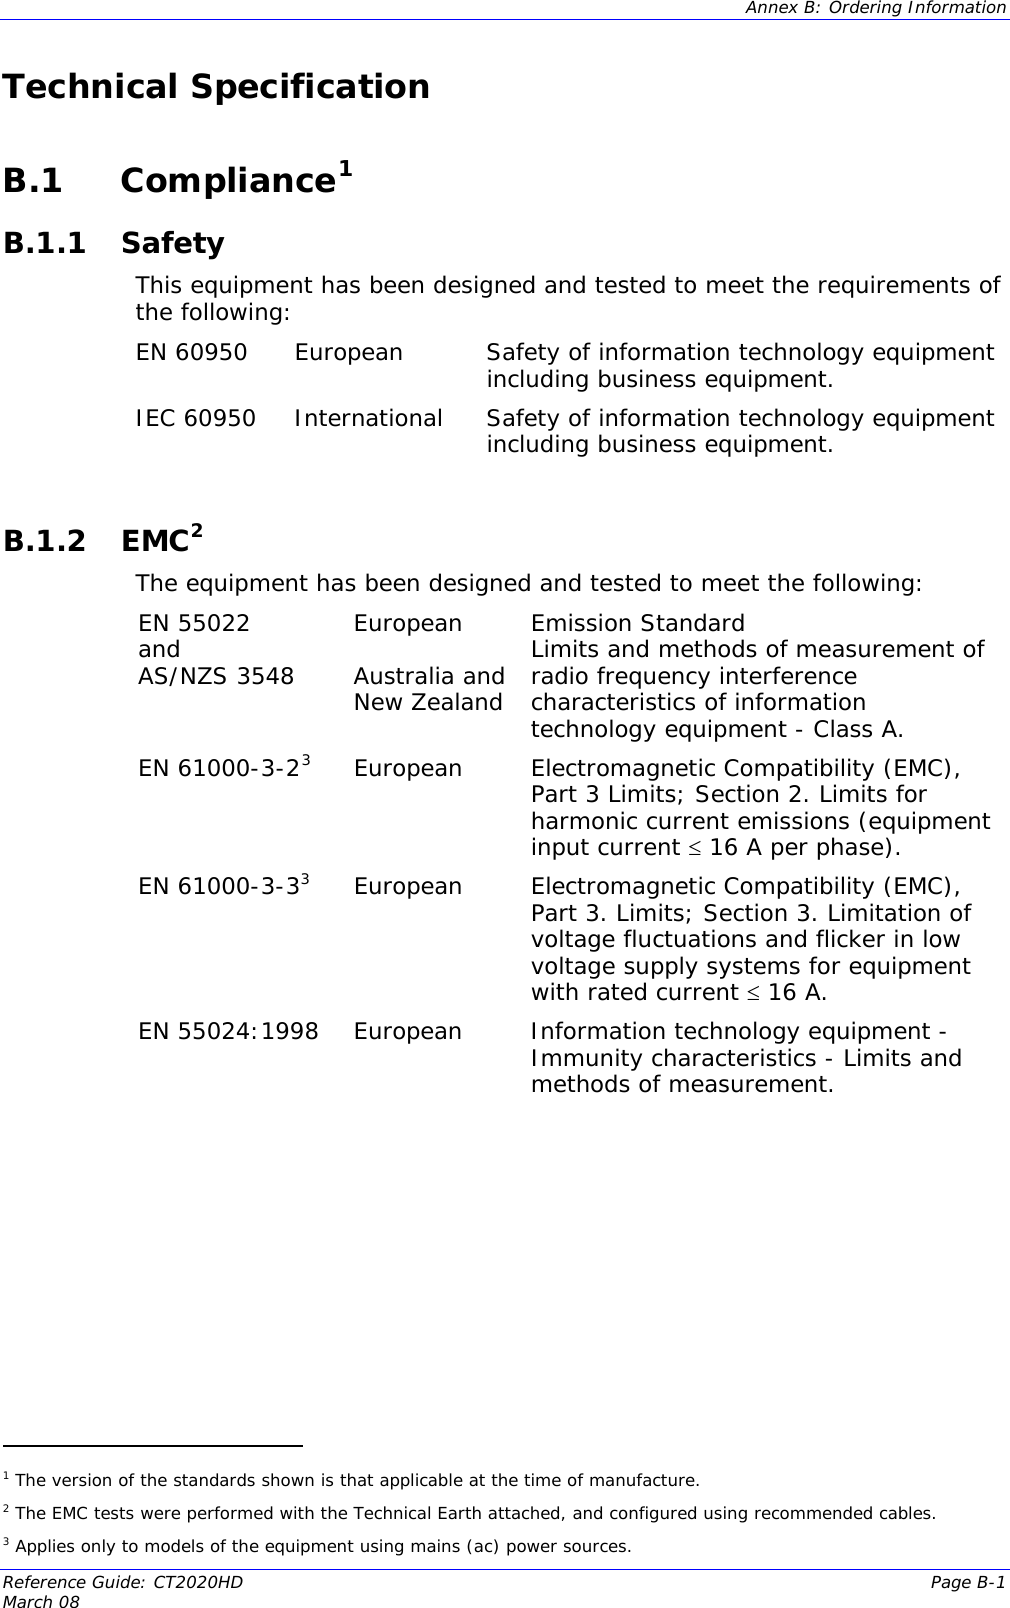  Annex B: Ordering Information  Reference Guide: CT2020HD  Page B-1 March 08                                           Technical Specification  B.1 Compliance1  B.1.1 Safety This equipment has been designed and tested to meet the requirements of the following:  EN 60950  European  Safety of information technology equipment including business equipment. IEC 60950  International  Safety of information technology equipment including business equipment.  B.1.2 EMC2 The equipment has been designed and tested to meet the following:  EN 55022  and AS/NZS 3548   European  Australia and New Zealand Emission Standard Limits and methods of measurement of radio frequency interference characteristics of information technology equipment - Class A. EN 61000-3-23European  Electromagnetic Compatibility (EMC), Part 3 Limits; Section 2. Limits for harmonic current emissions (equipment input current ≤ 16 A per phase). EN 61000-3-33European  Electromagnetic Compatibility (EMC), Part 3. Limits; Section 3. Limitation of voltage fluctuations and flicker in low voltage supply systems for equipment with rated current ≤ 16 A. EN 55024:1998   European  Information technology equipment - Immunity characteristics - Limits and methods of measurement.     1 The version of the standards shown is that applicable at the time of manufacture. 2 The EMC tests were performed with the Technical Earth attached, and configured using recommended cables. 3 Applies only to models of the equipment using mains (ac) power sources. 